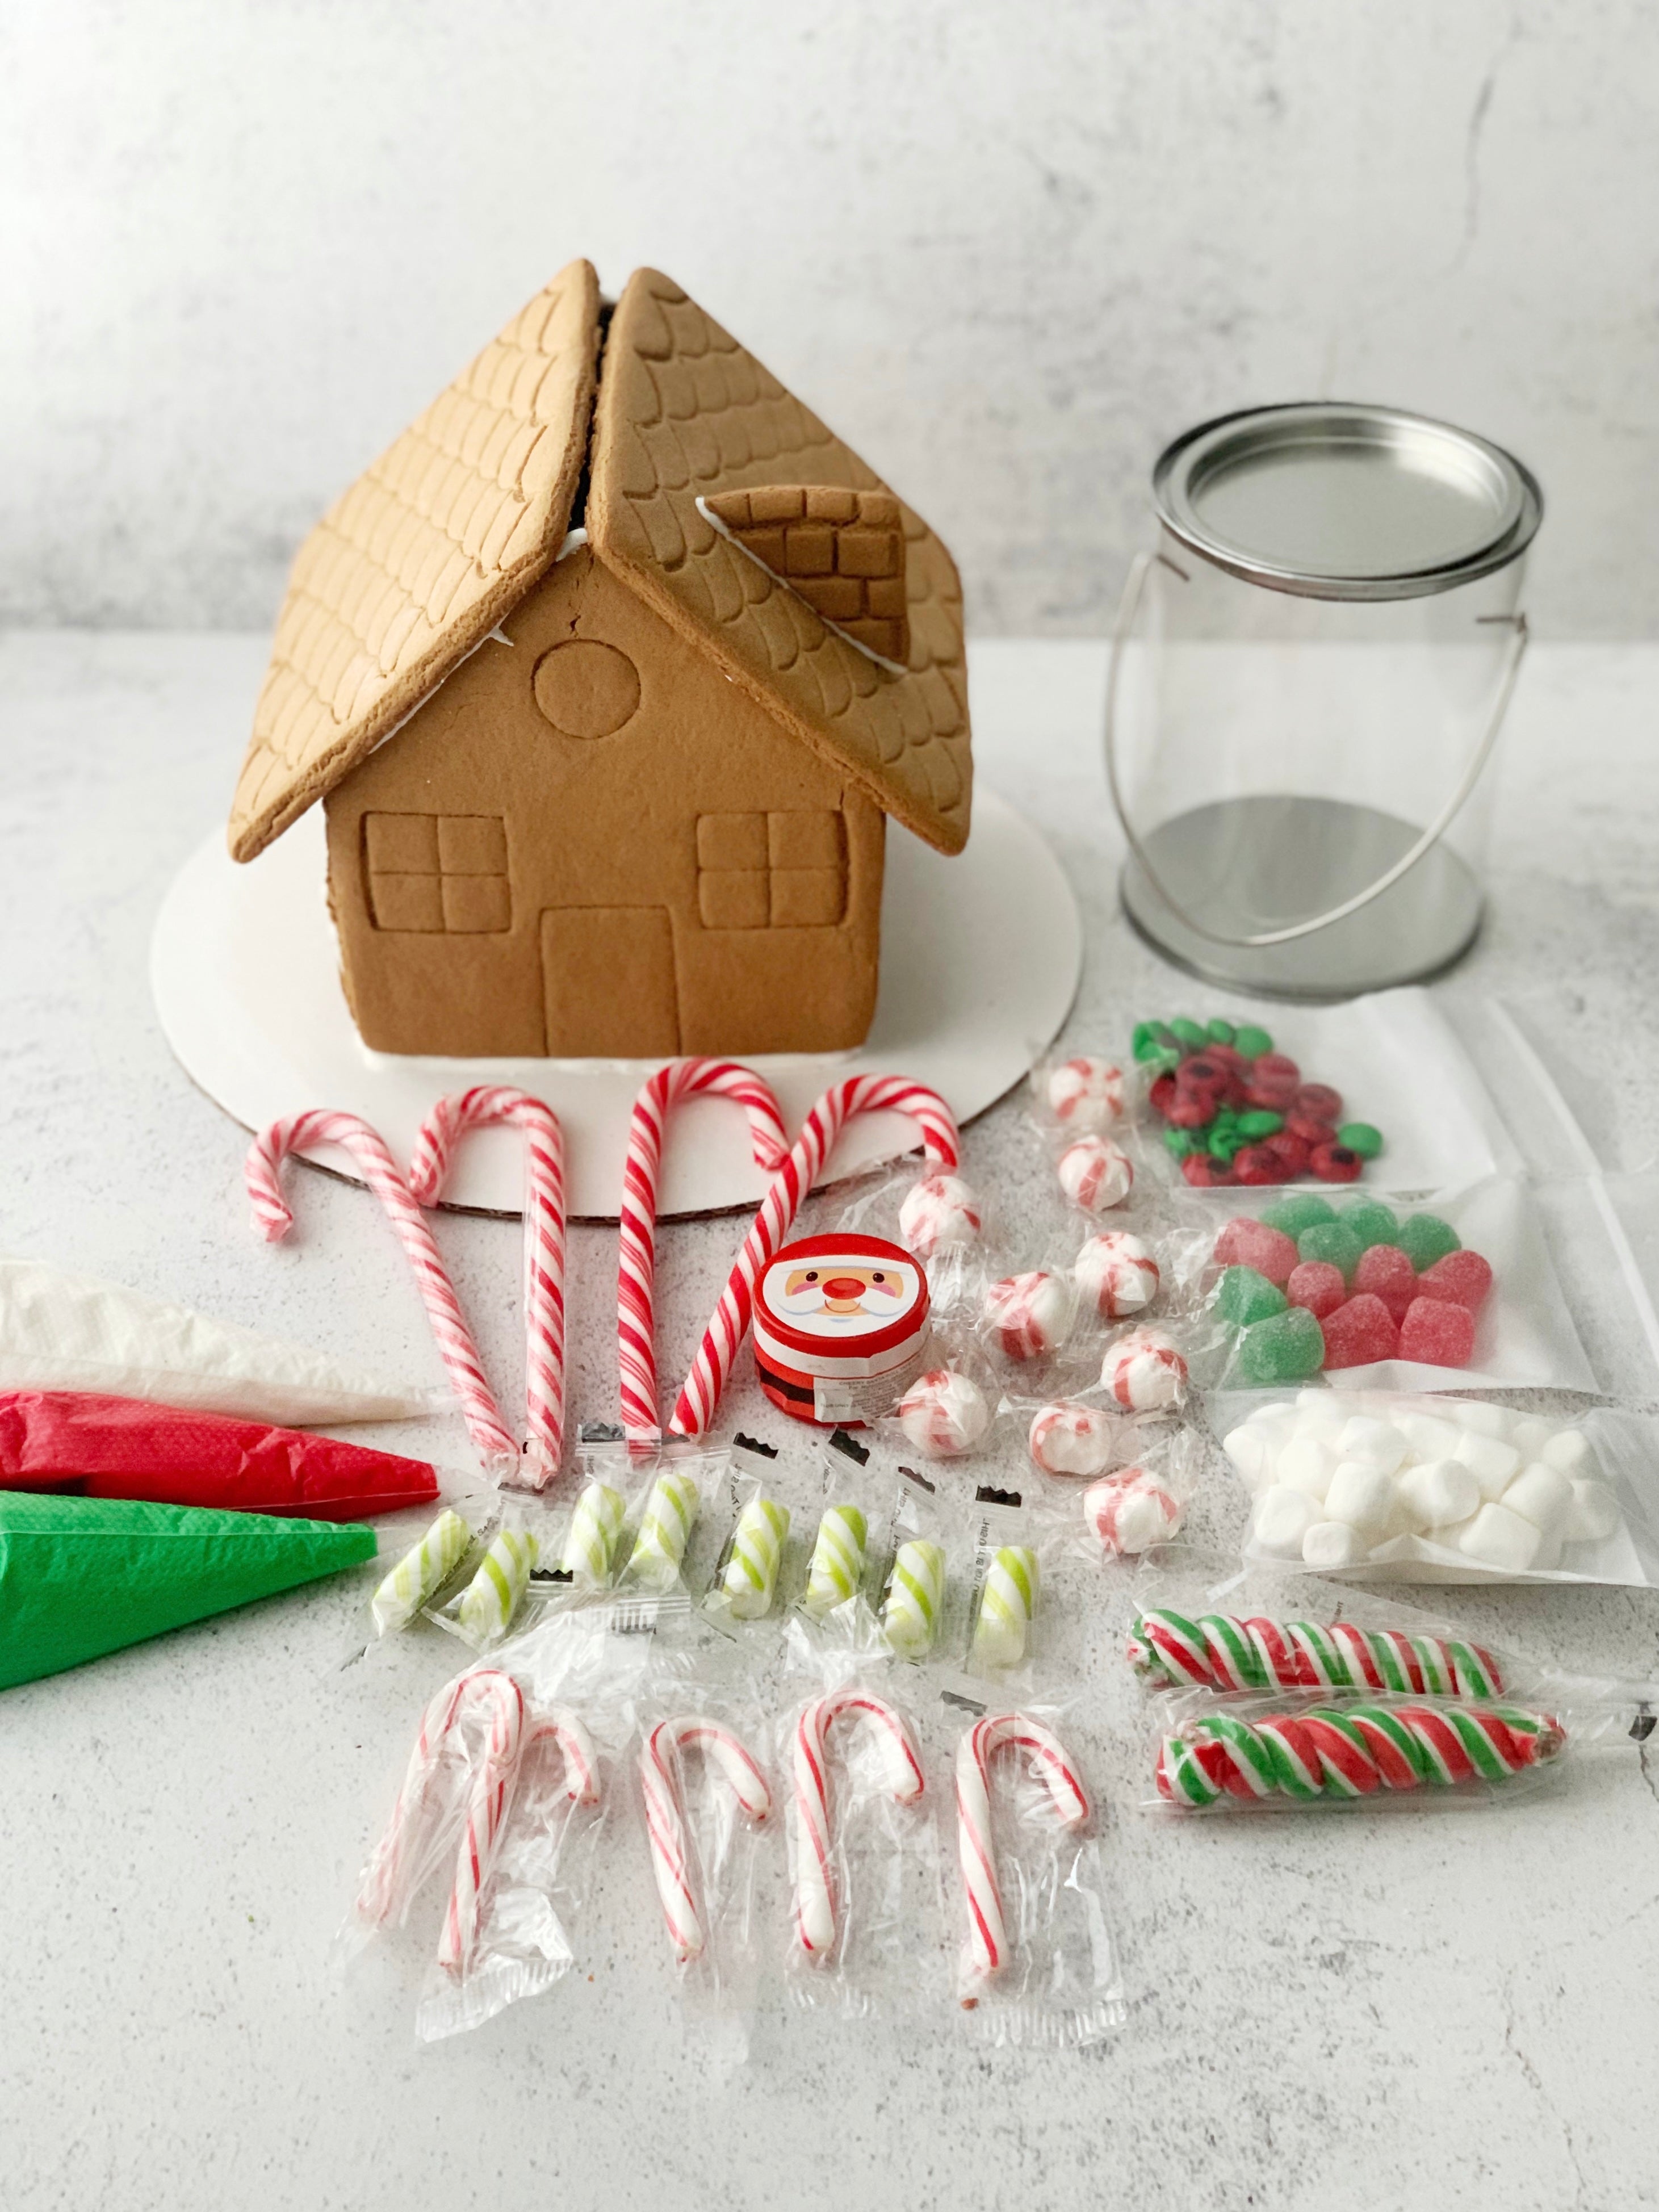 Decorate Your Own Pre-Assembled Gingerbread House Kit – Flowerbake